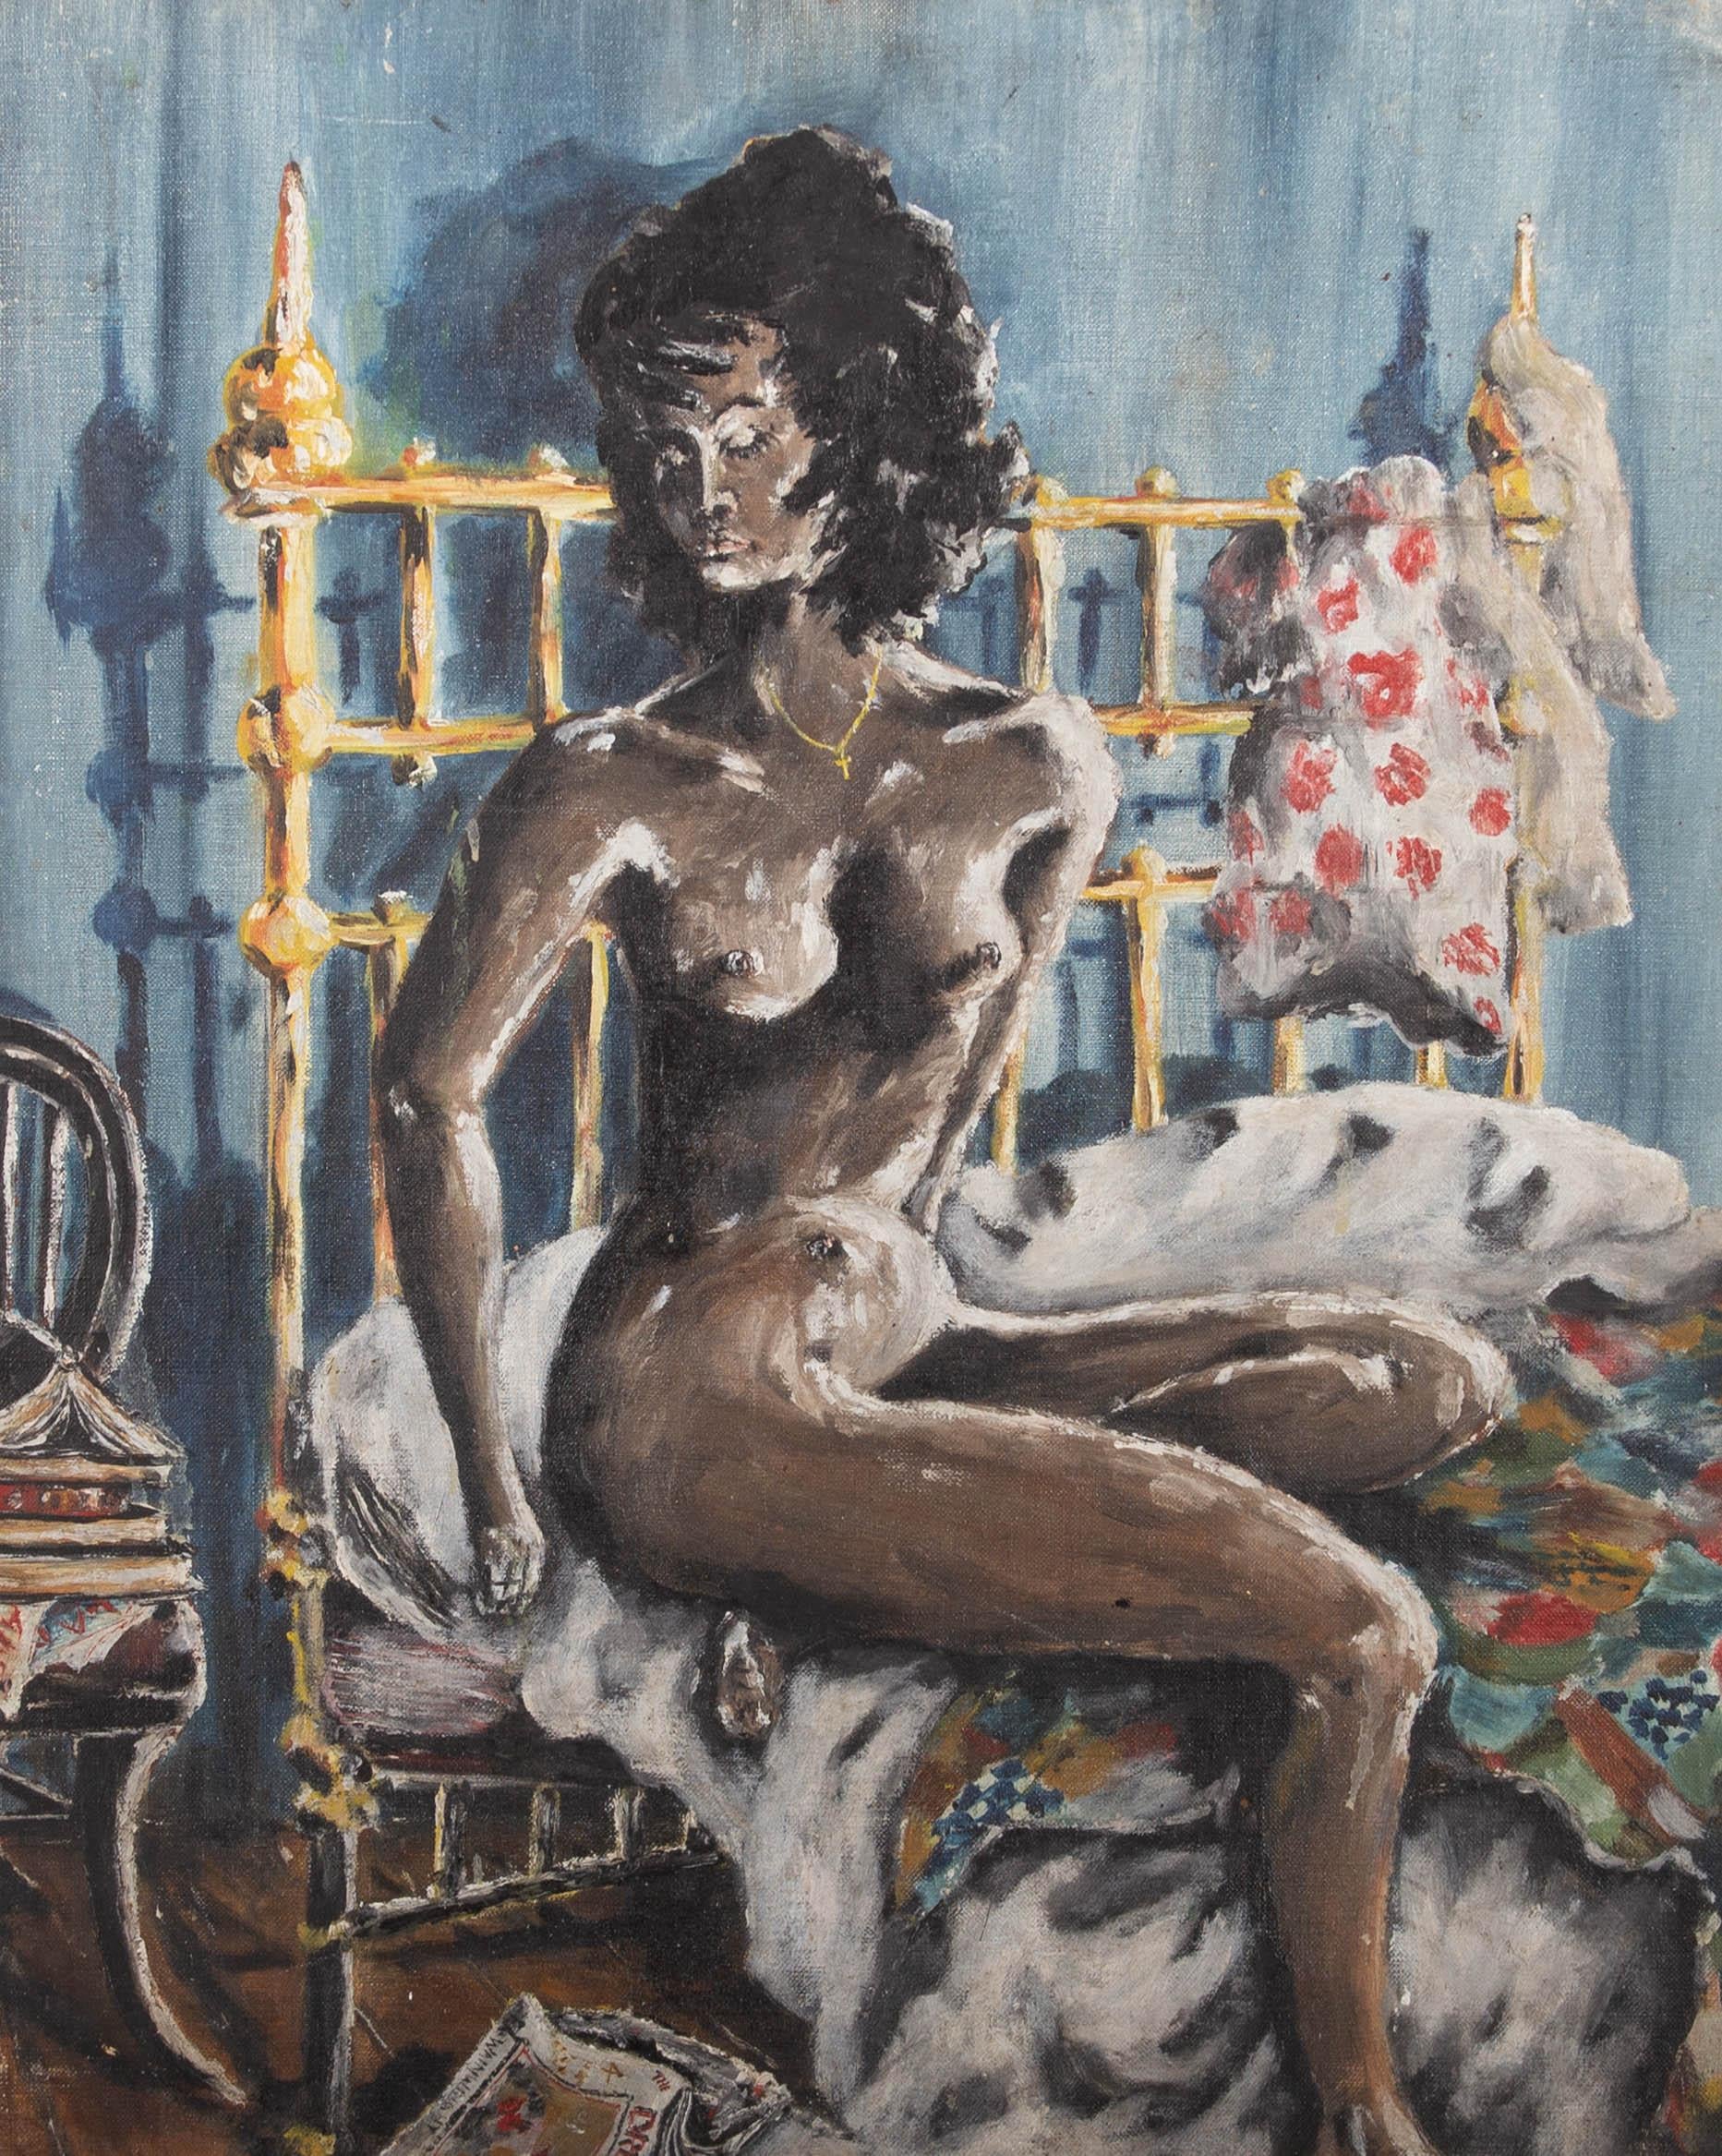 Mid 20th Century Oil - Portrait of Nude Female Figure in Bedroom - Painting by Unknown